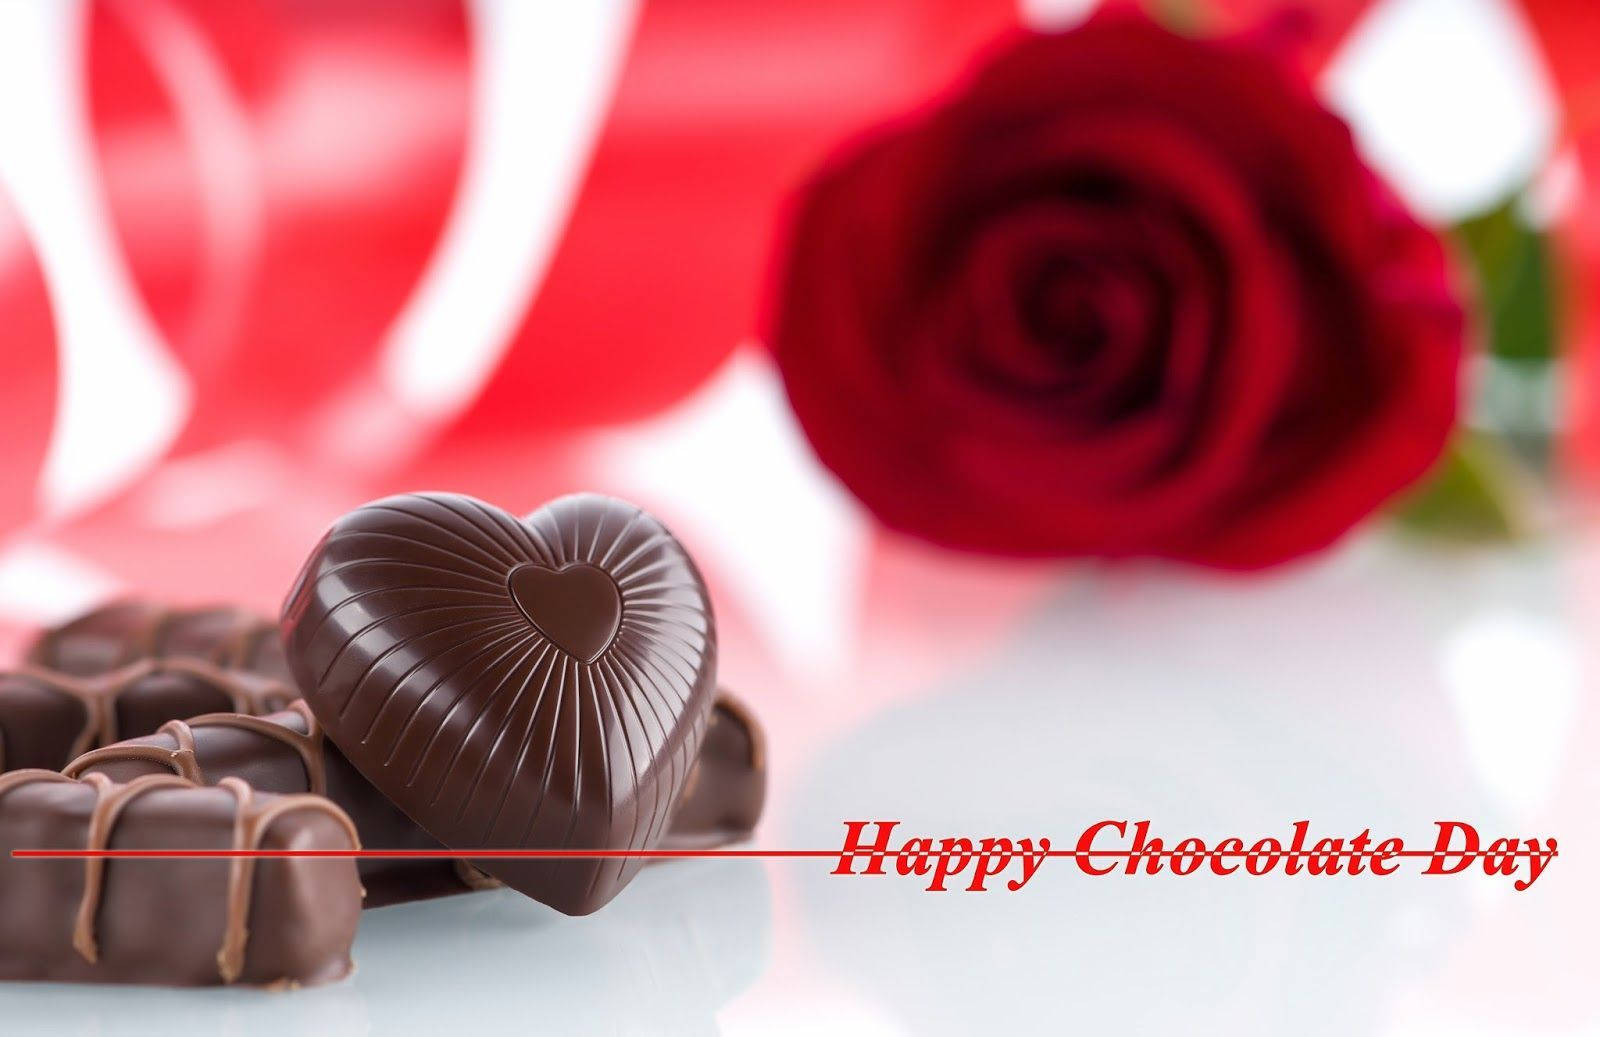 Chocolate Day With Red Rose Wallpaper